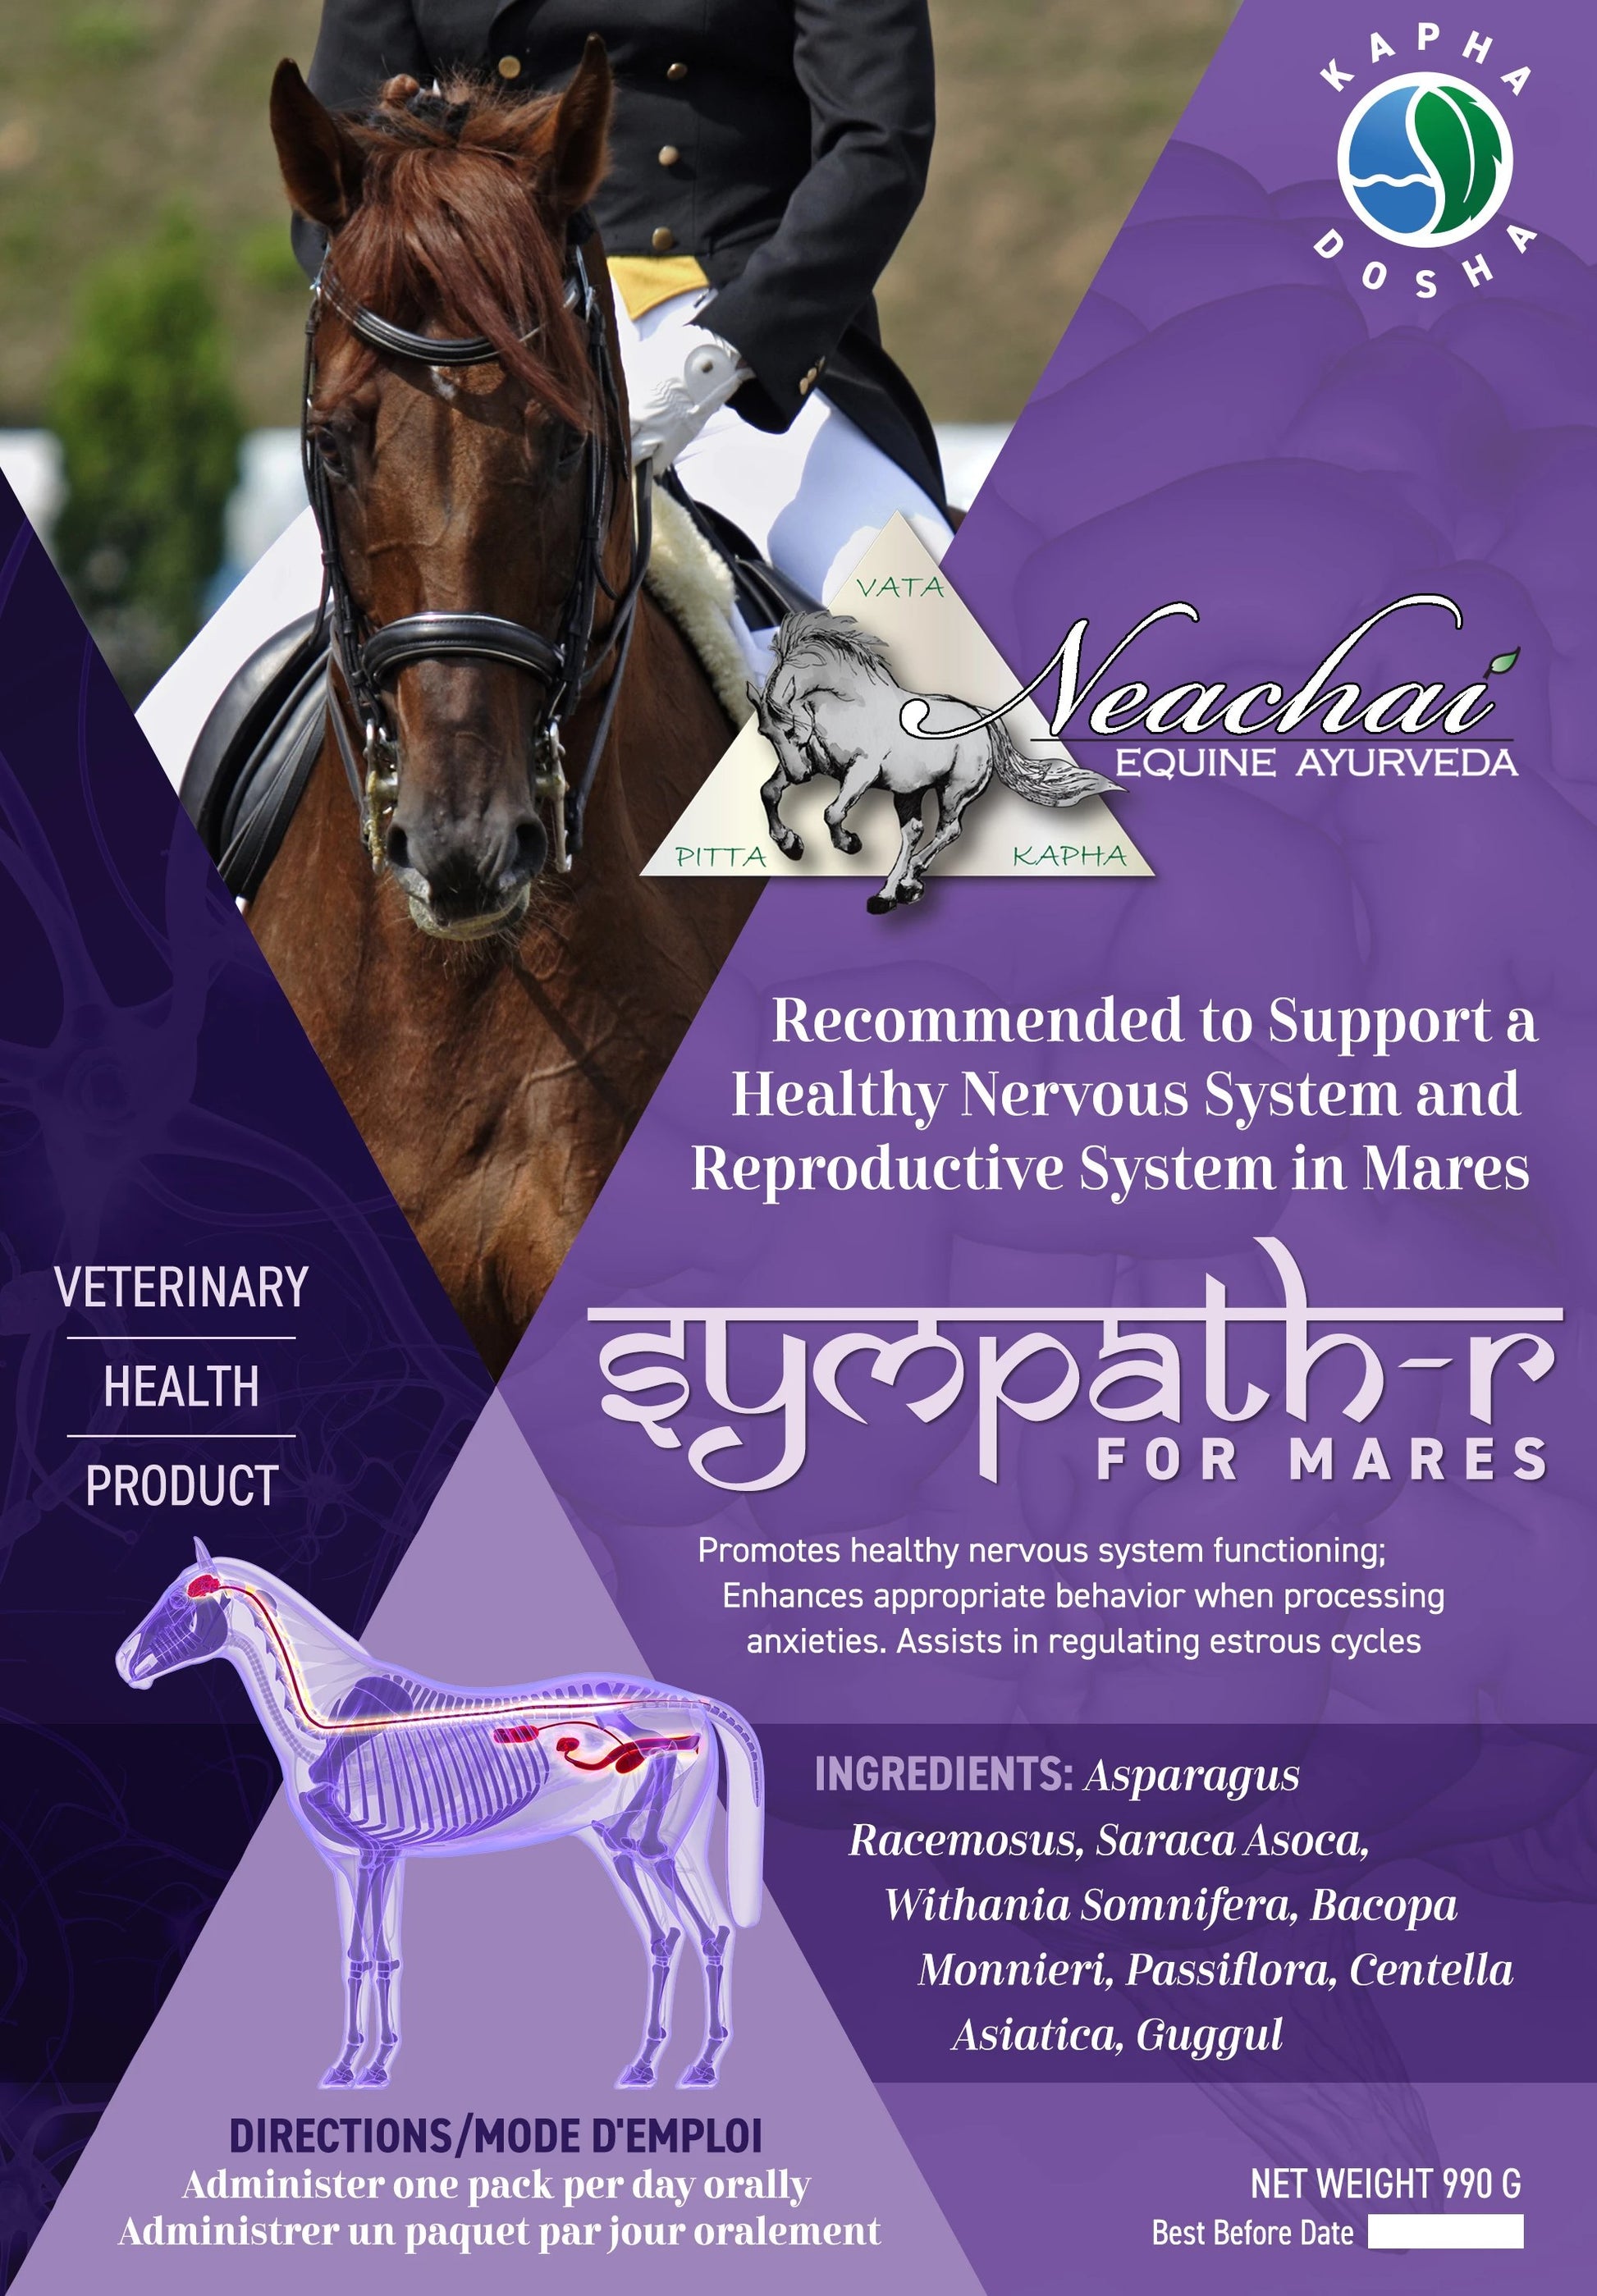 Sympath-R for Mares Herbal Supplement Neachai - Equestrian Fashion Outfitters